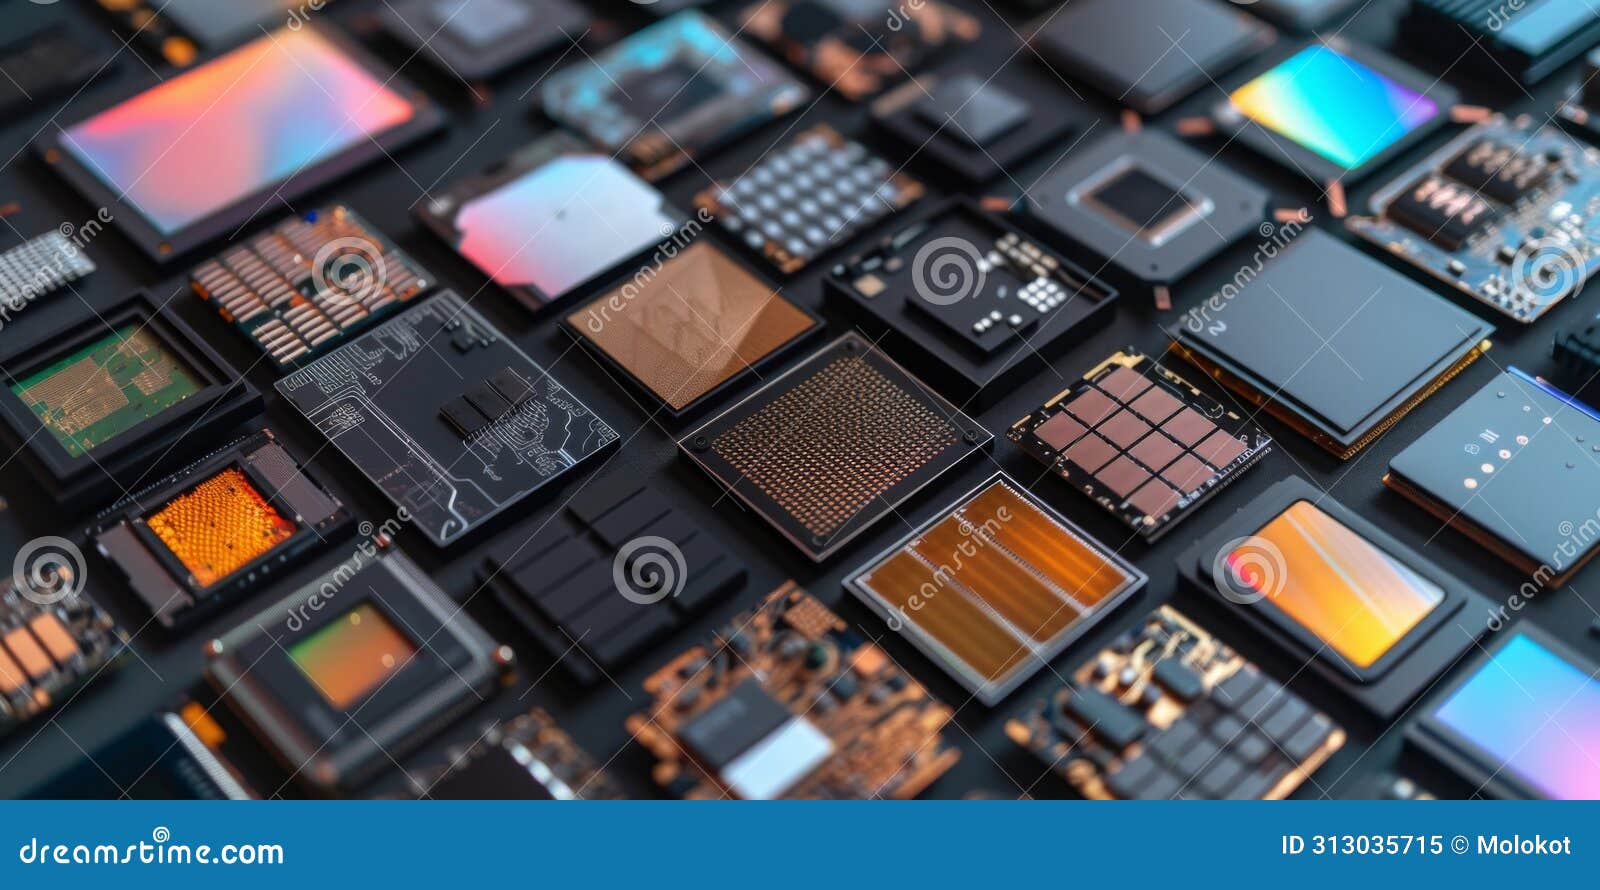 manufacturing of microchips. photo of top view of microchips, microcircuits, electronic devices. contemporary technologies, sci-fi